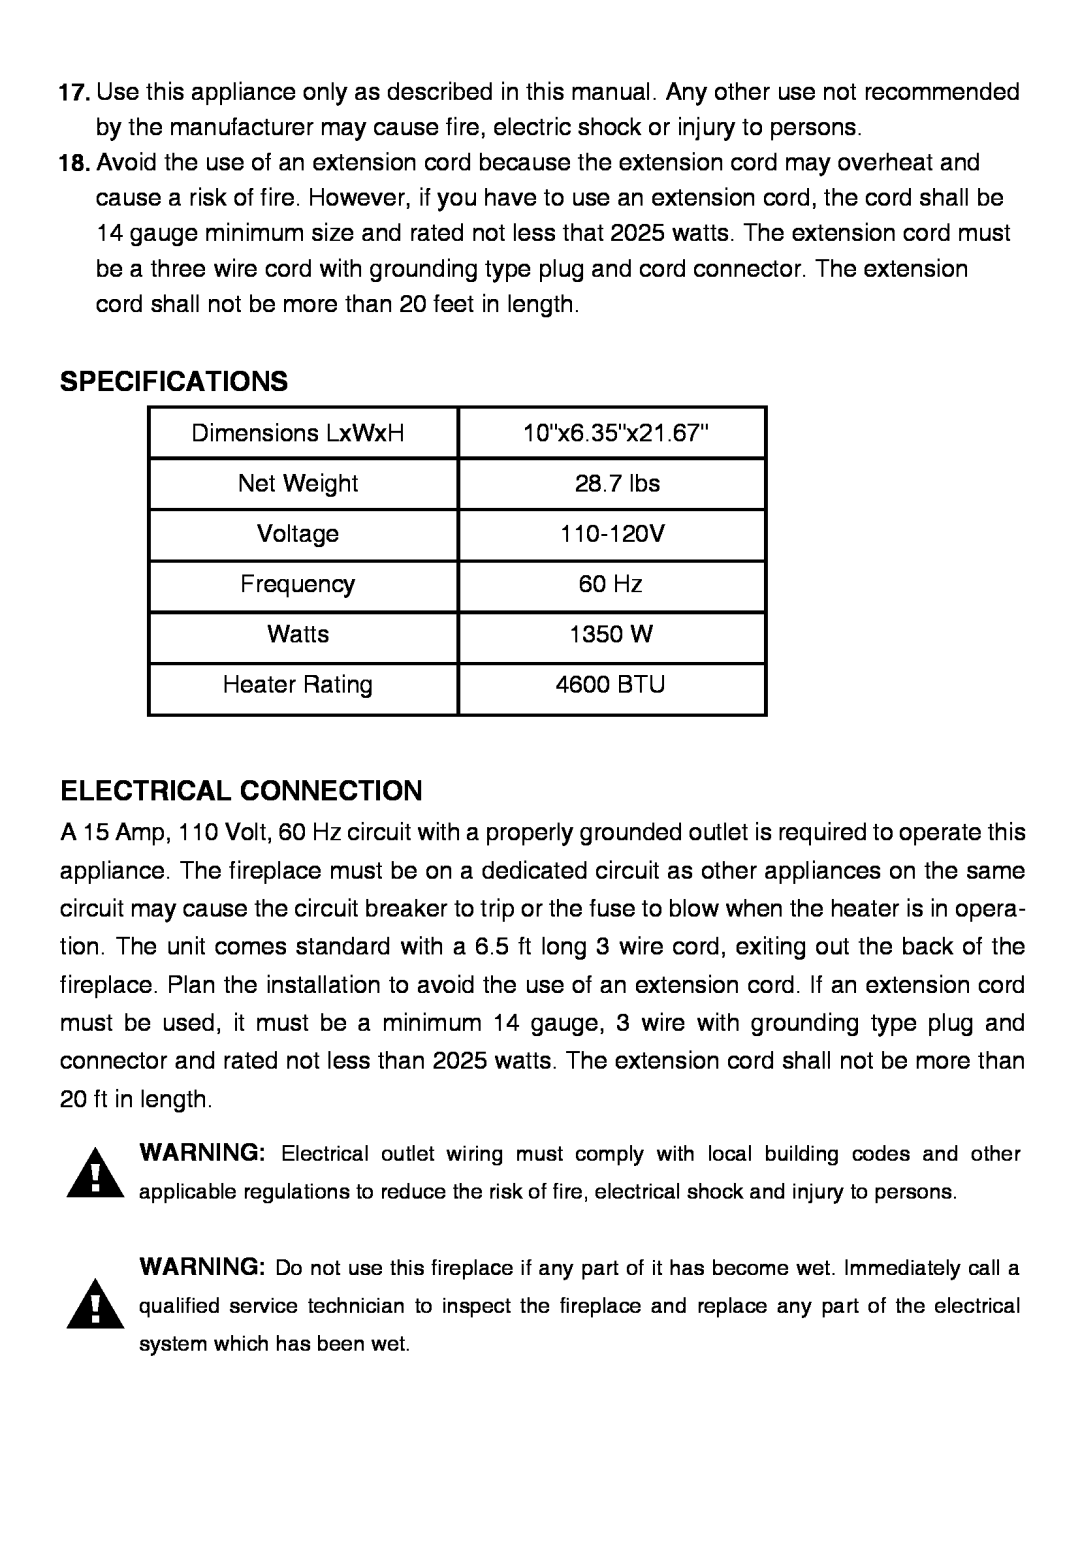 Well Traveled Living 60351, Vernon manual Specifications, Electrical Connection 